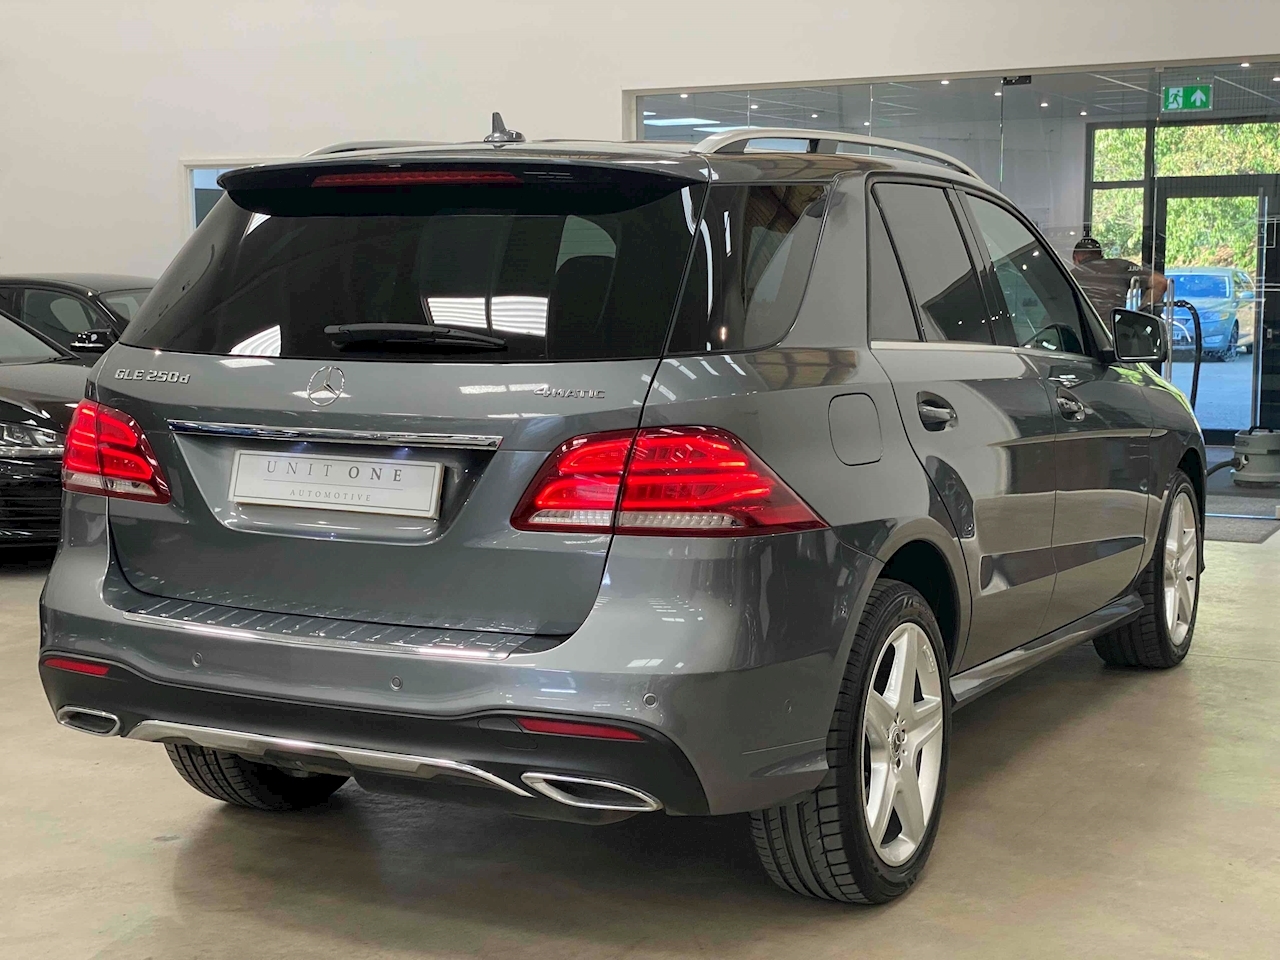 2.1 GLE250d AMG Line SUV 5dr Diesel G-Tronic 4MATIC Euro 6 (s/s) (204 ps)